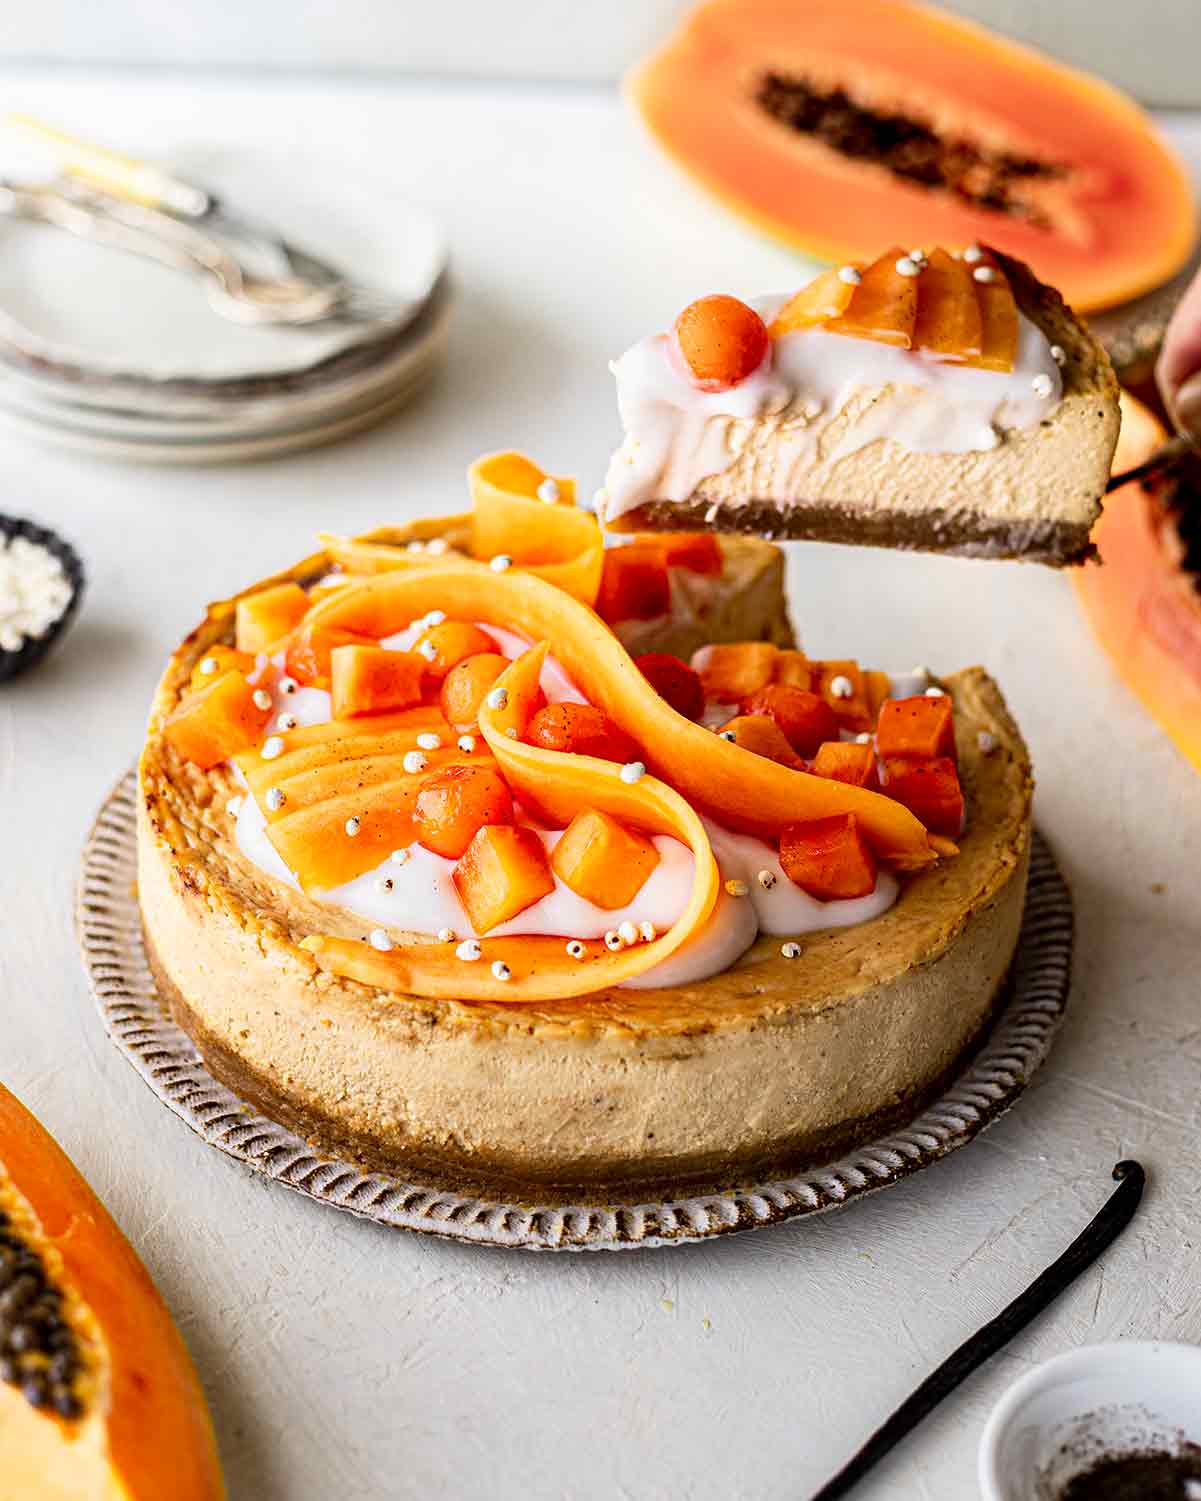 Papaya vanilla cheesecake on plate with slice lifted out showing its creamy texture.